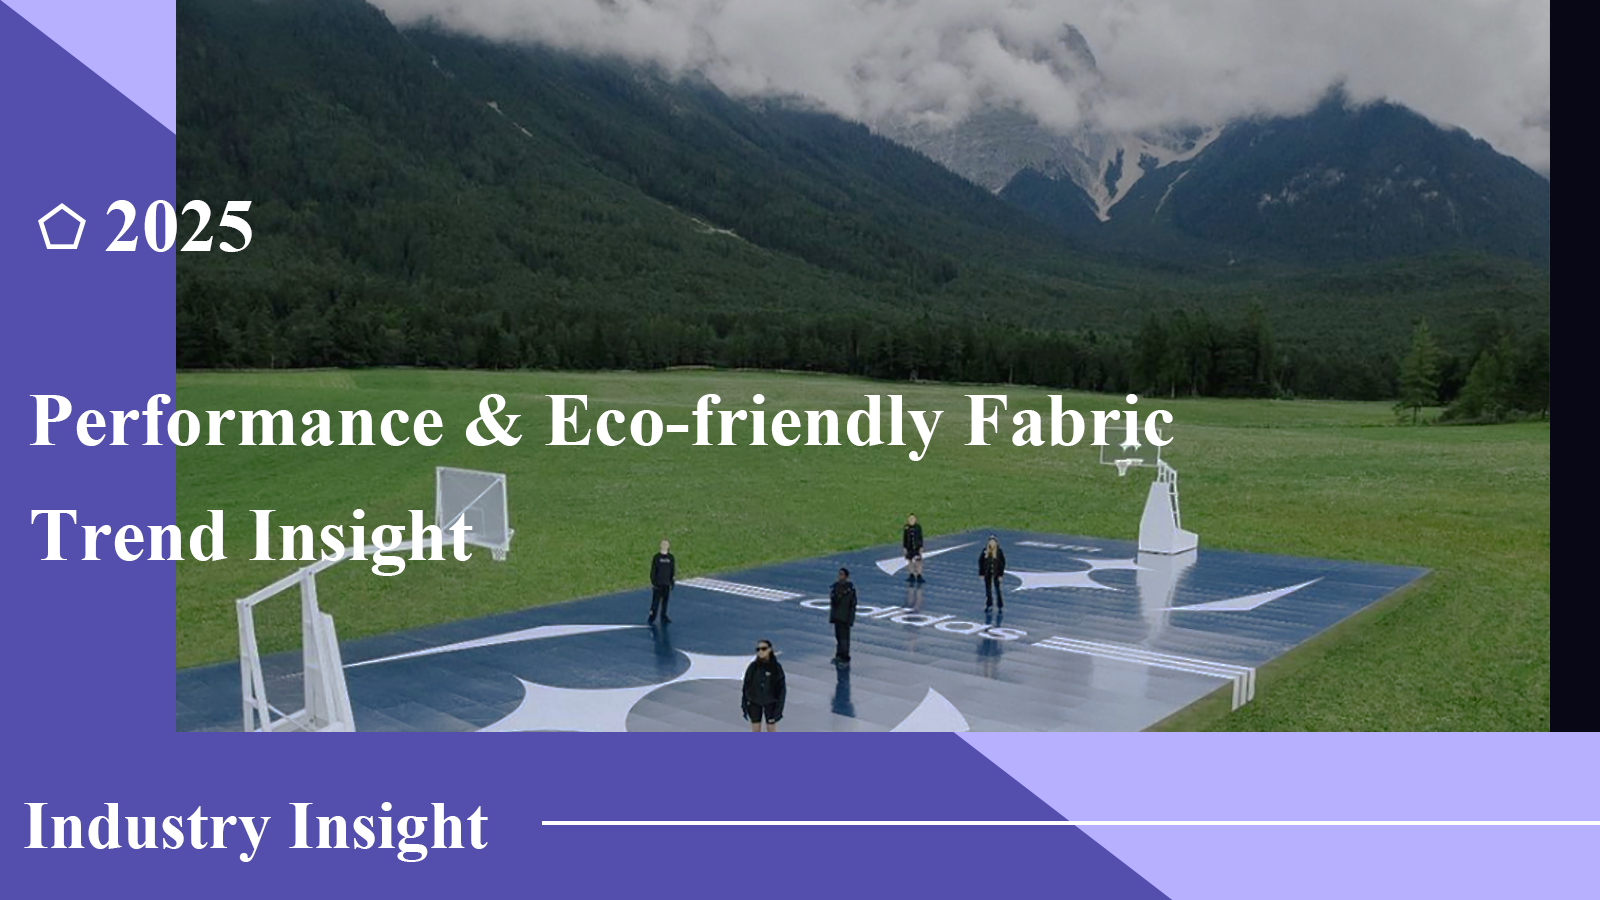 2025 Performance & Eco-Friendly Fabric Industry Insight